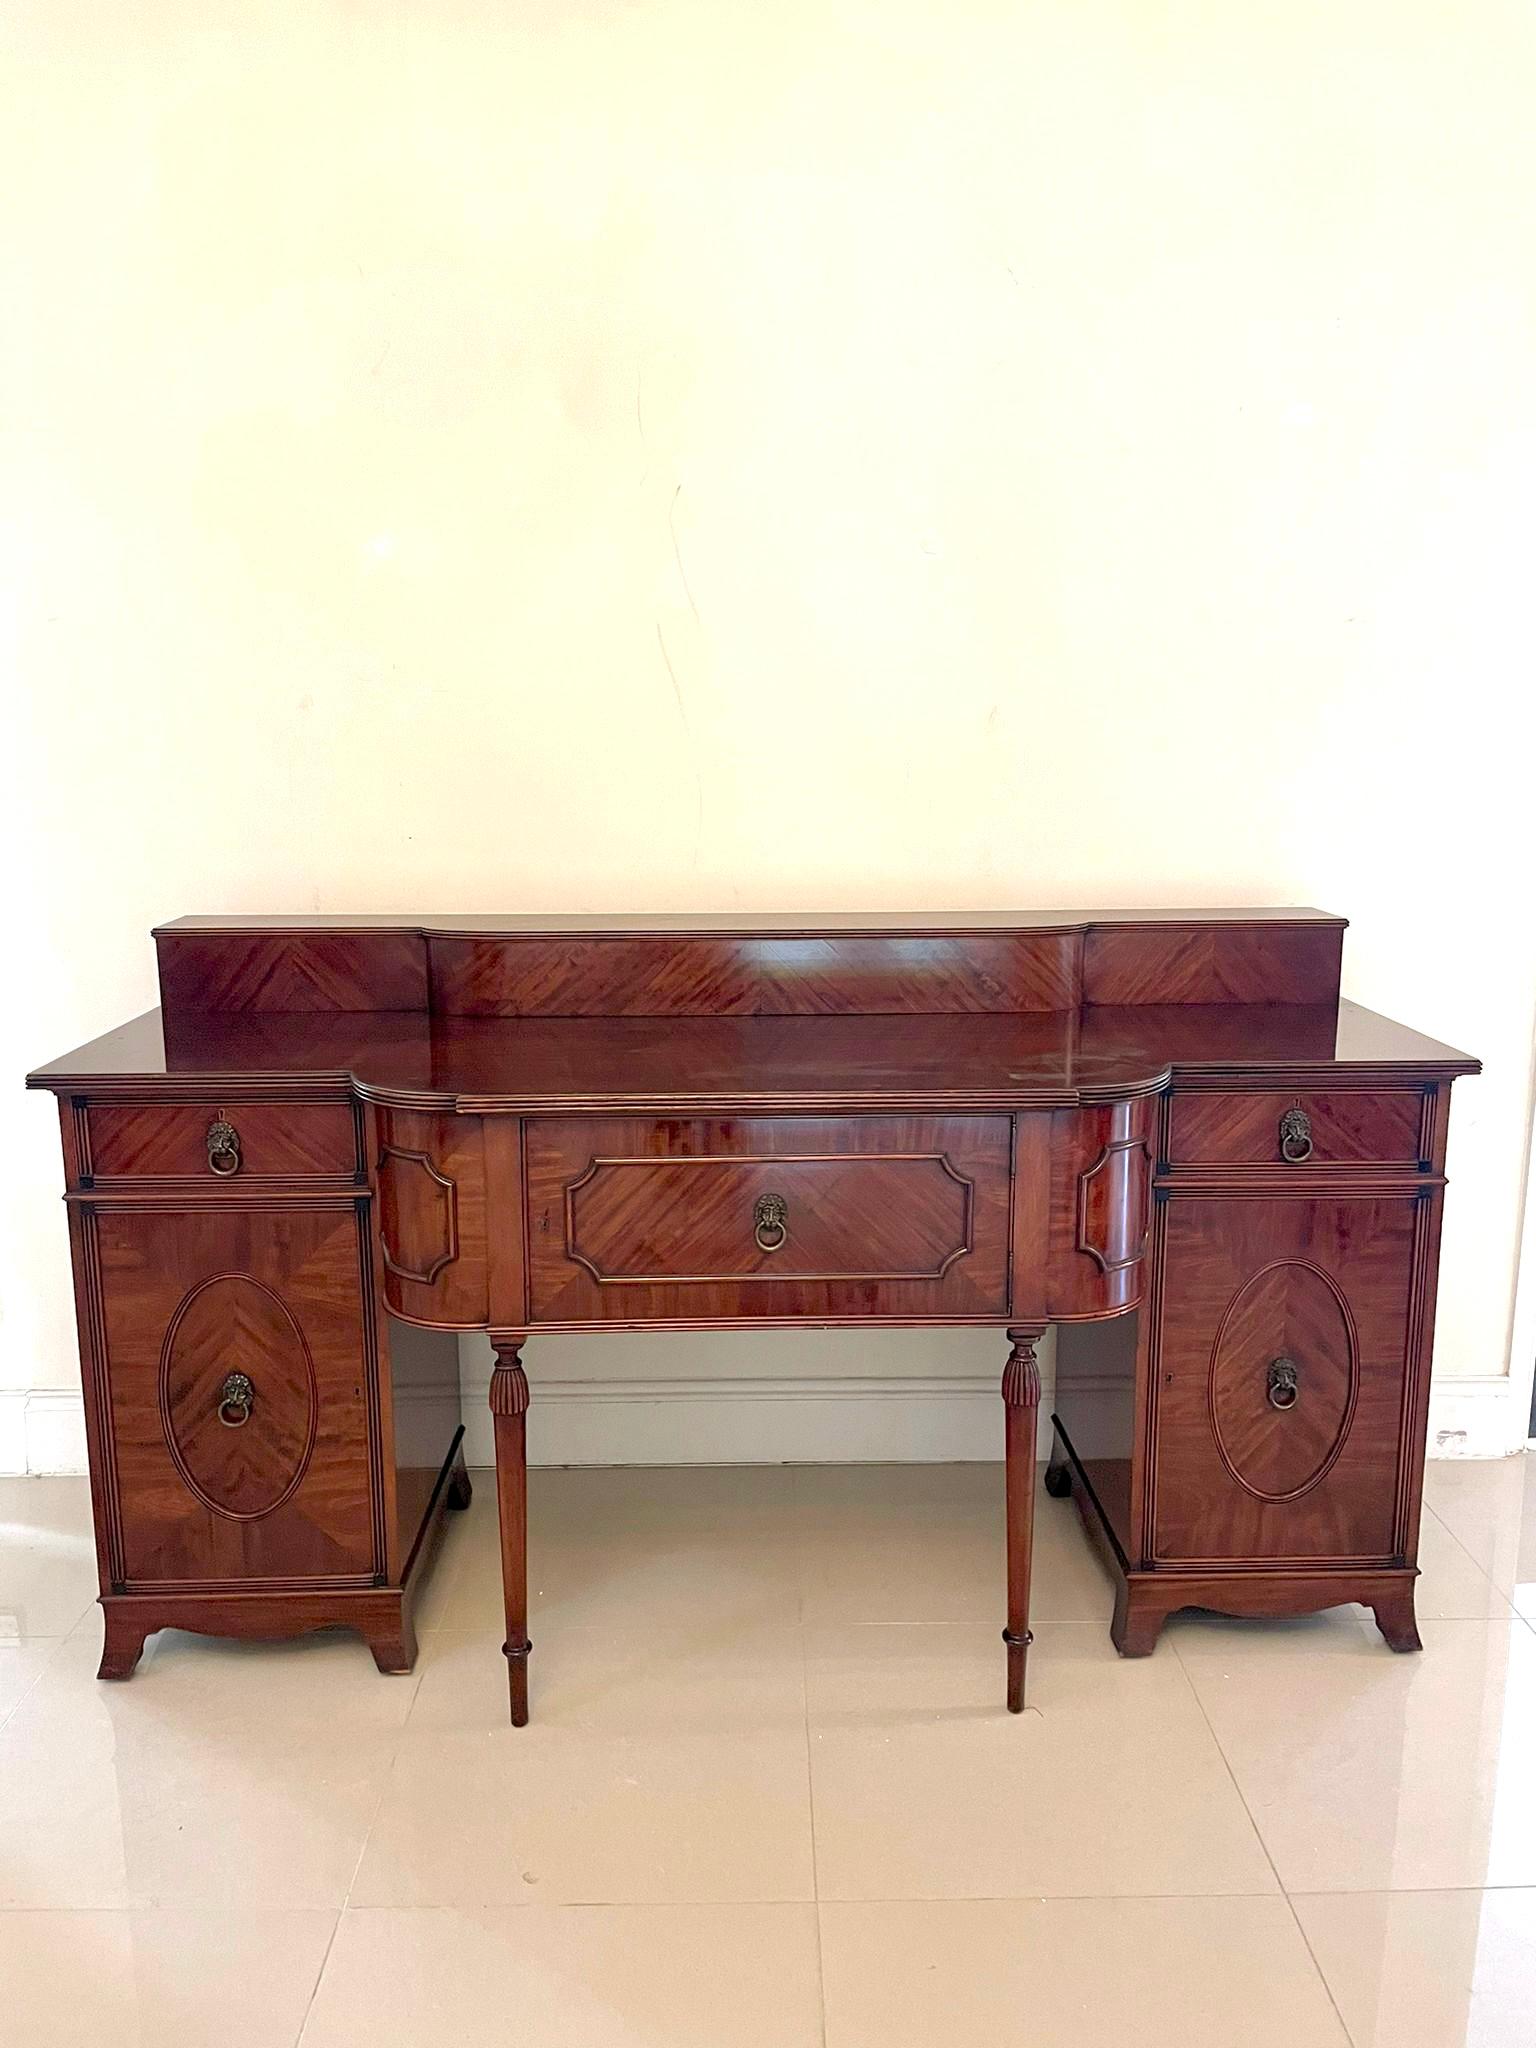 Outstanding quality antique Edwardian mahogany sideboard having a quality mahogany gallery back above a shaped mahogany top with a reeded edge above a figured mahogany moulded door flanked by two bow fronted moulded sides with original brass lions